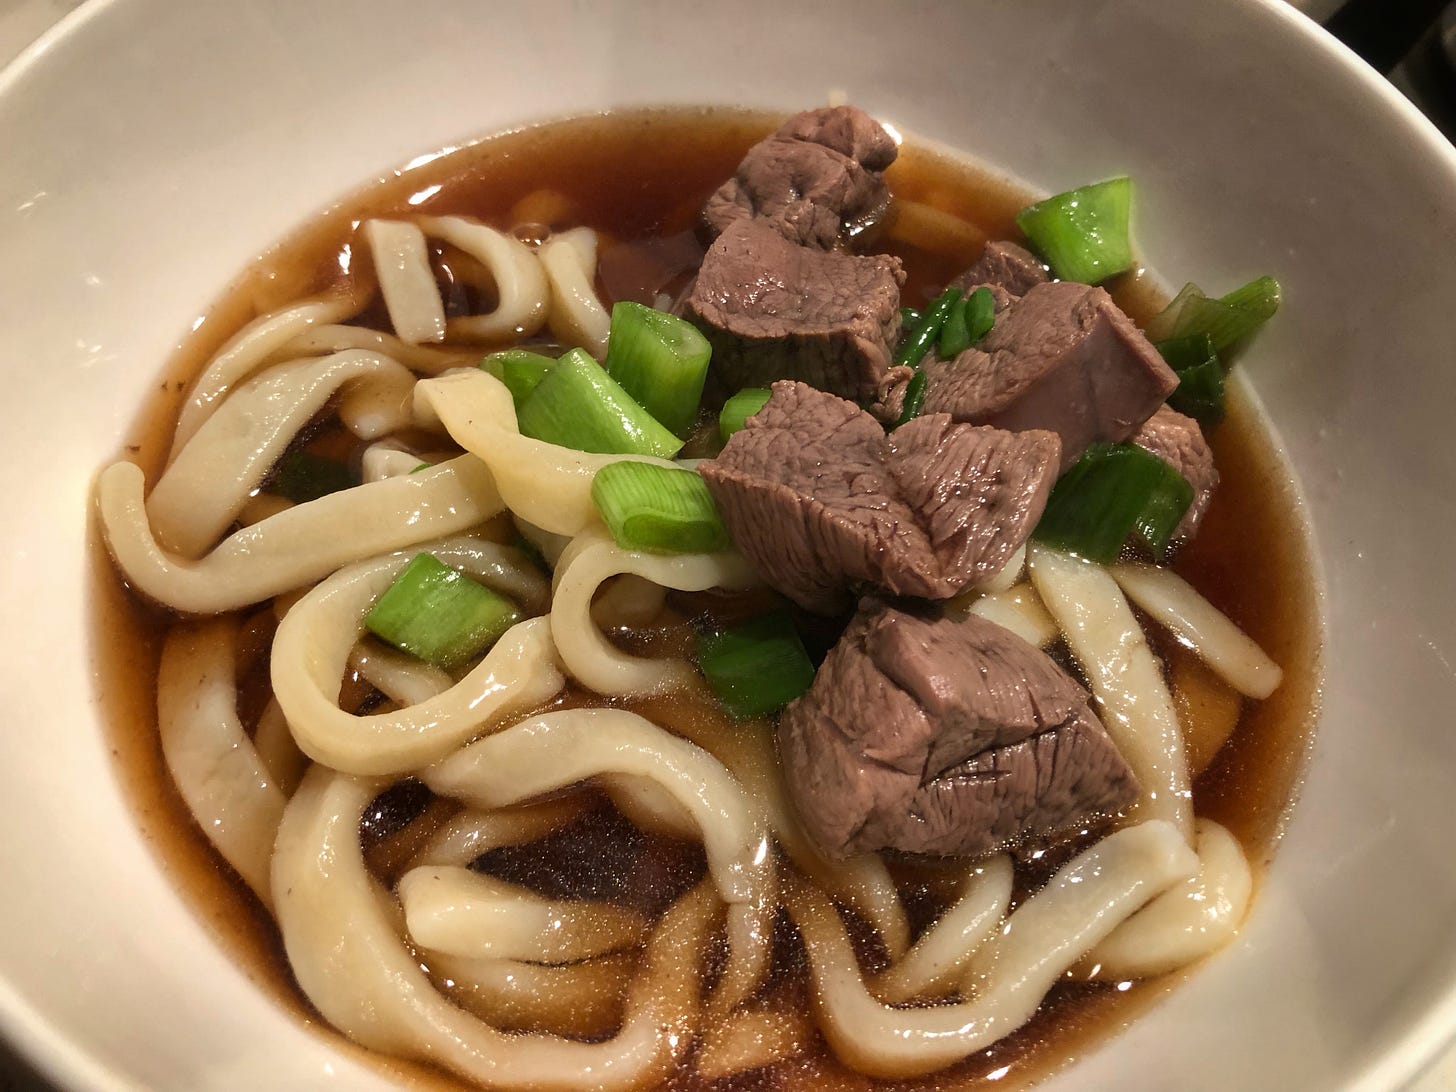 A bowl of slightly irregularly-shaped noodles in broth, topped with chunks of poached duck breast and chopped green onion